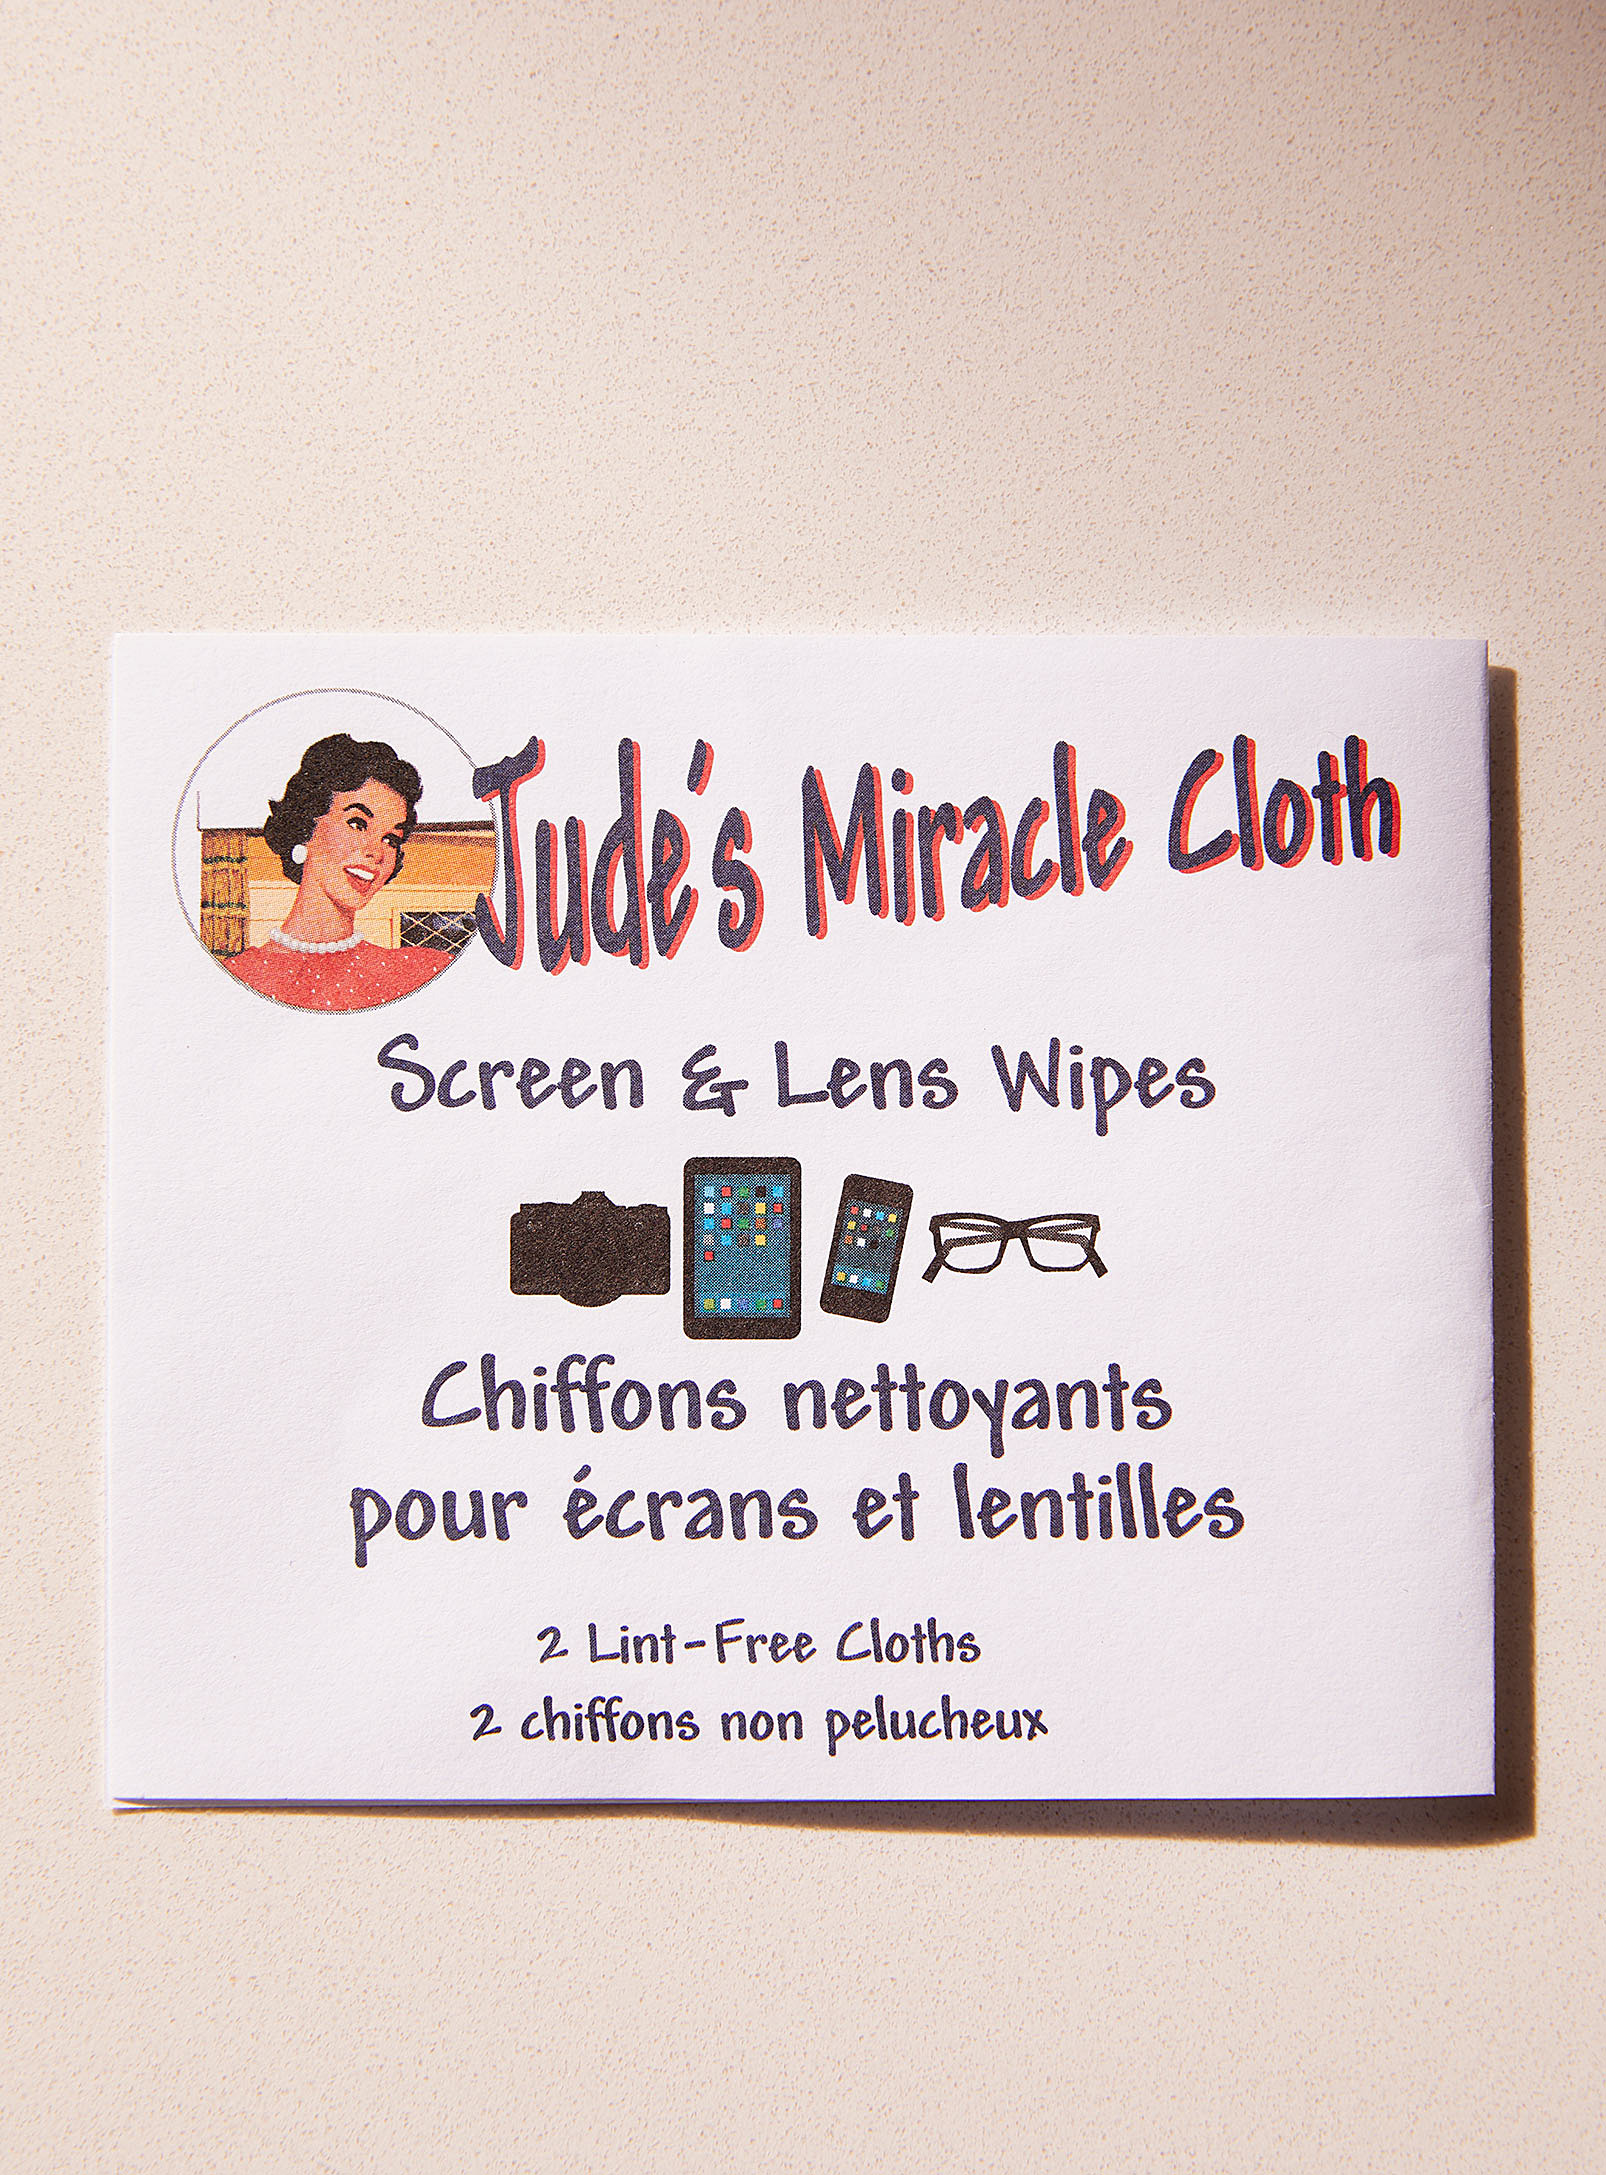 Jude's Miracle Cloth